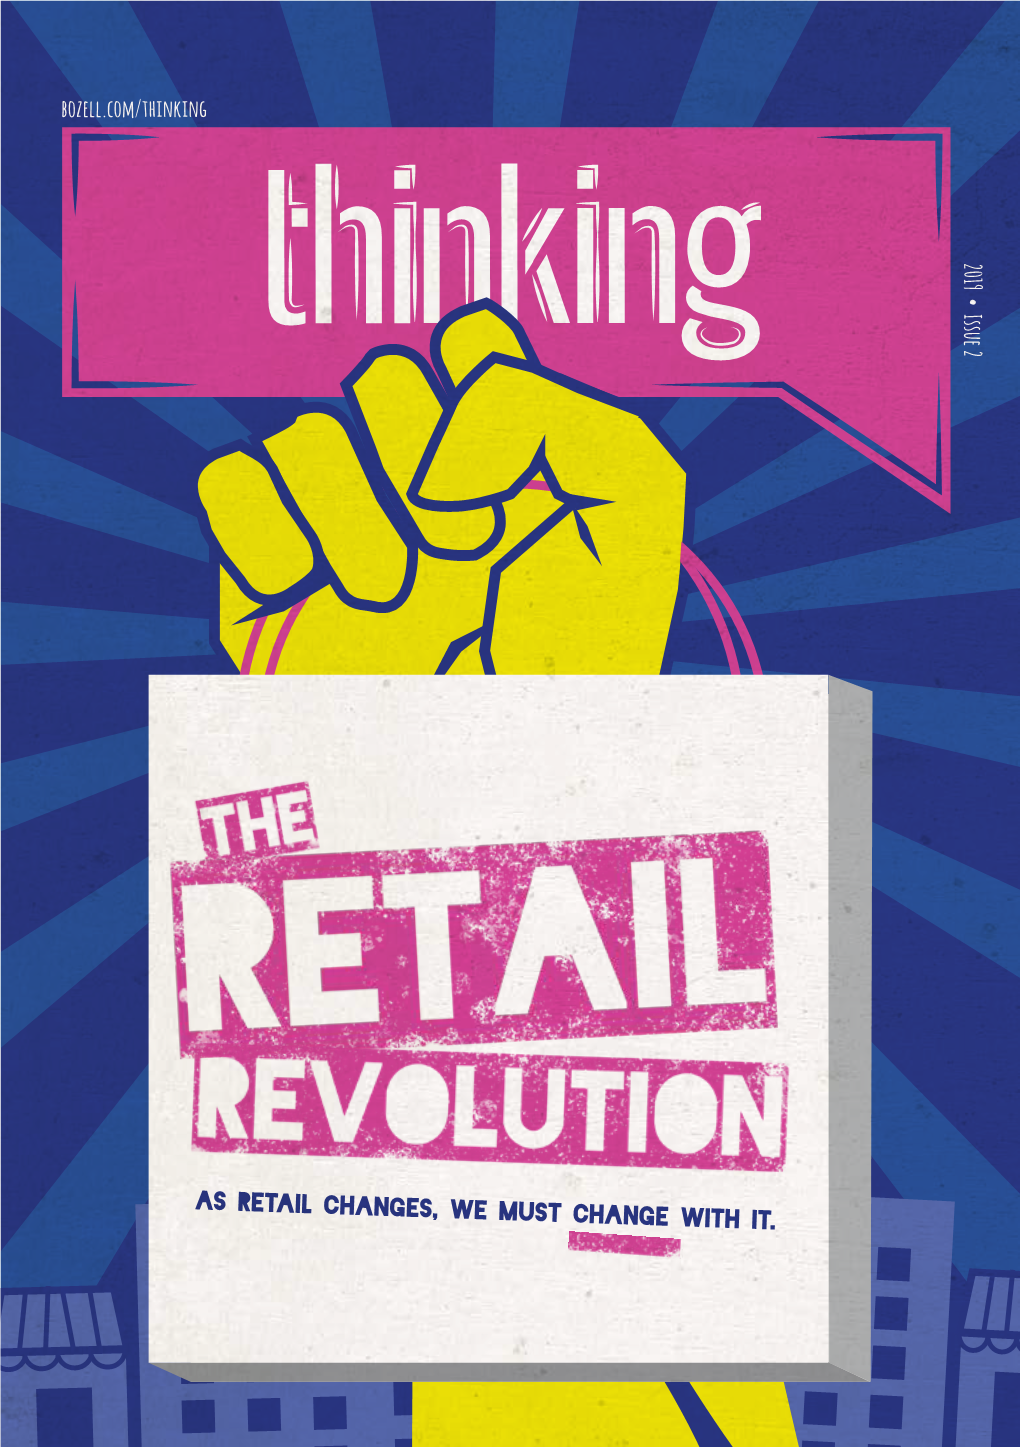 As Retail Changes, We Must Change with It